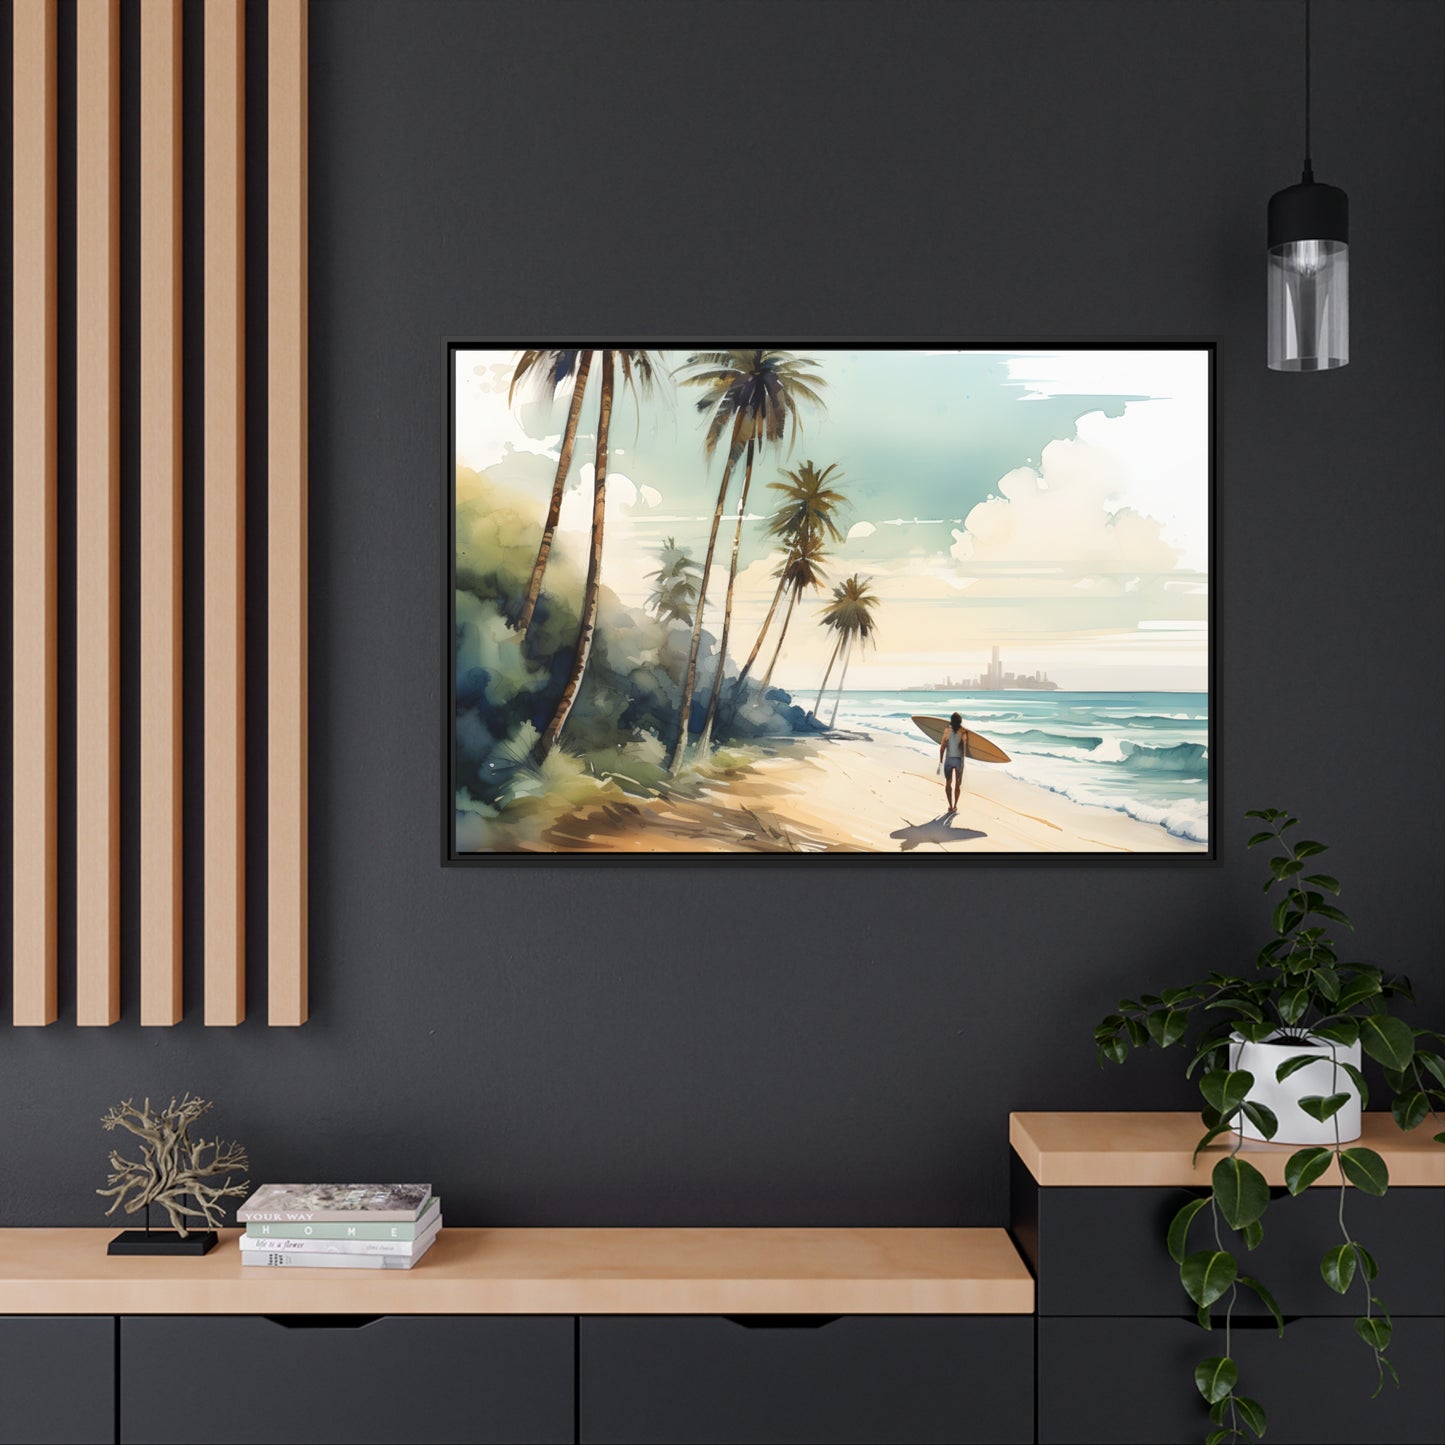 Framed Canvas Artwork Beach Ocean Surfing Art Surfer On Beach Holding Surfboard And Palm Tree Silhouettes Water Color Style City In The Distant Background Hindered By Sea Mist Impressive Beach Scene Floating Frame Canvas Artwork Lifestyle